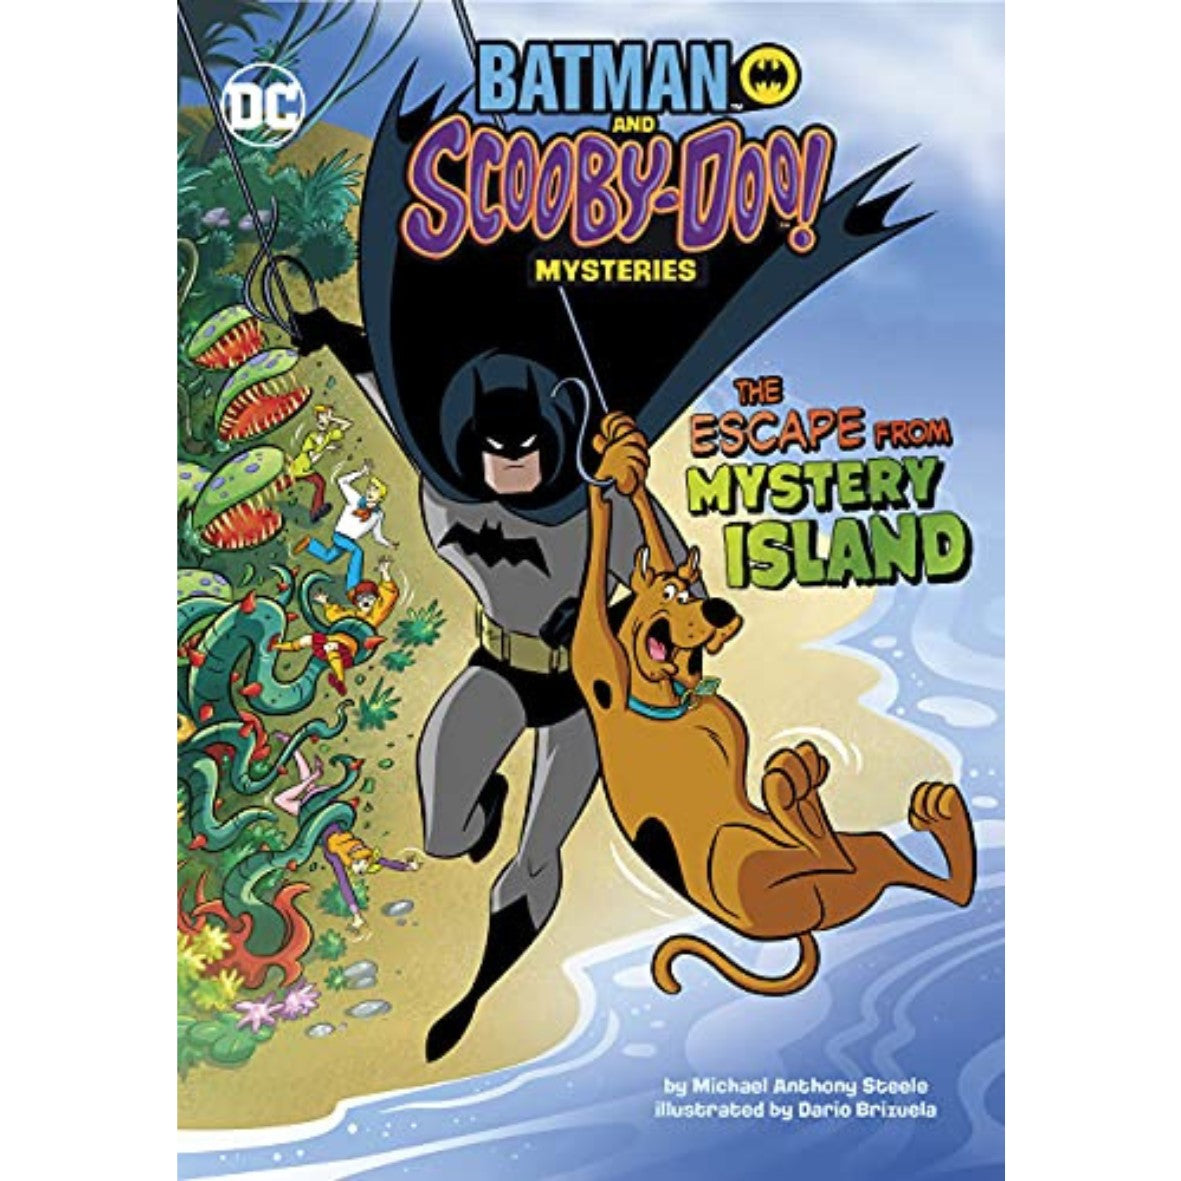 Batman and Scooby-Doo! The Escape from Mystery Island